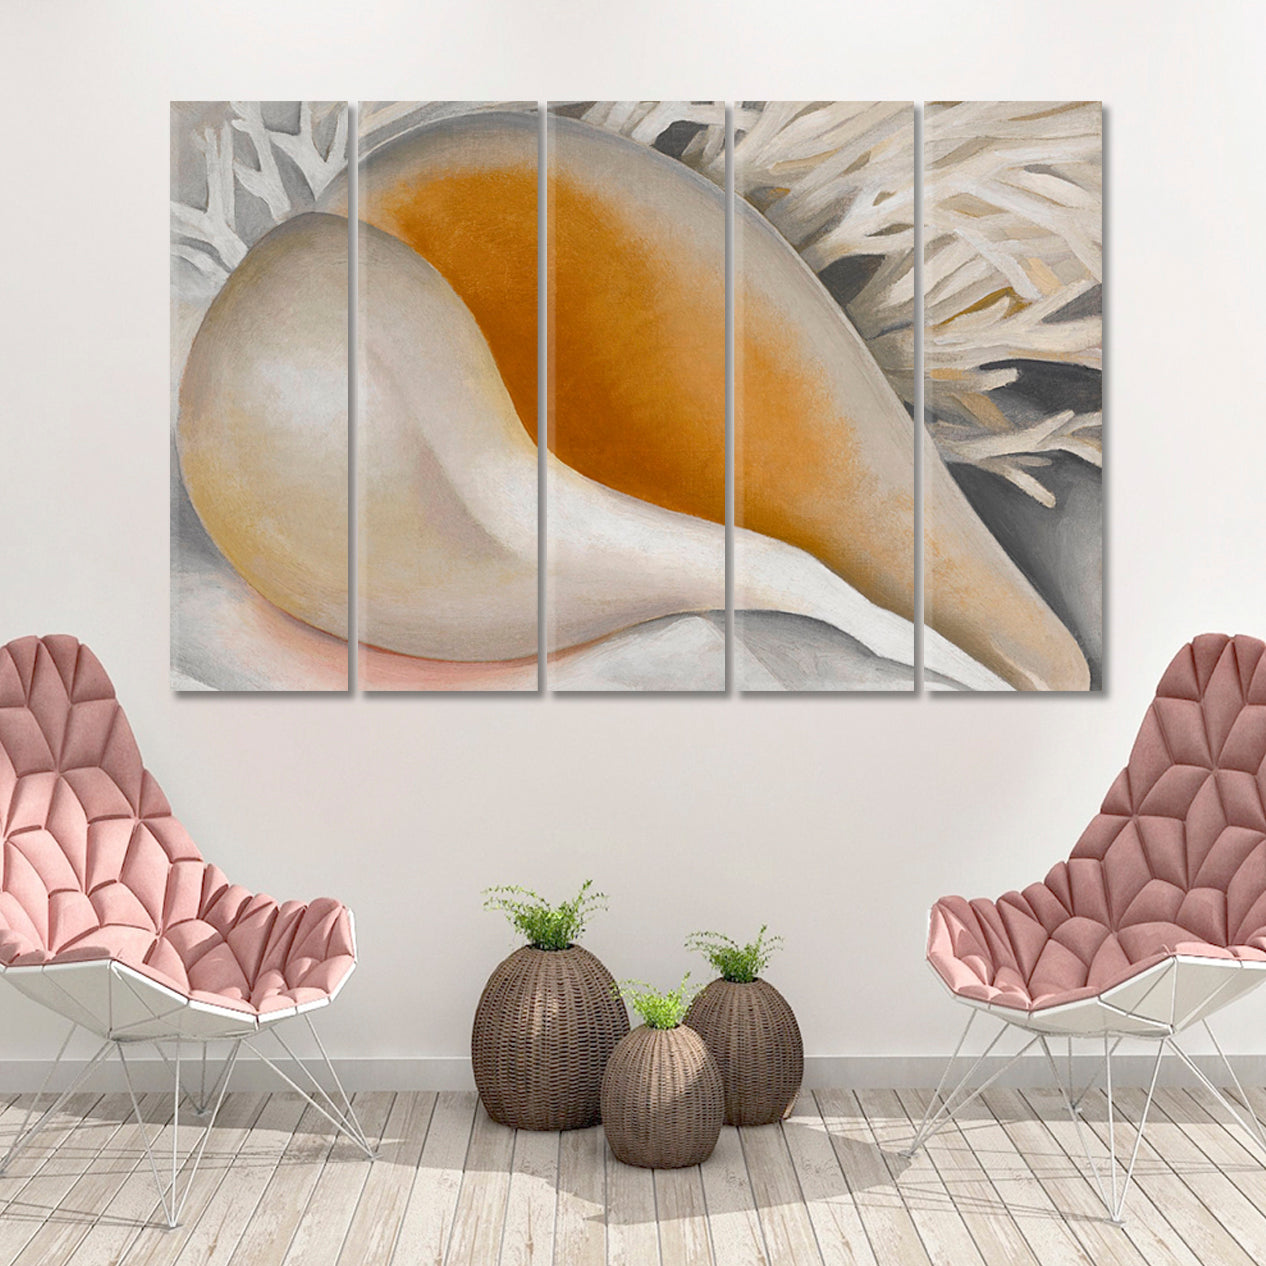 ABSTRACT SHELL Unique Vision Sea Life Nature Shapes and Forms Contemporary Art Artesty 5 panels 36" x 24" 